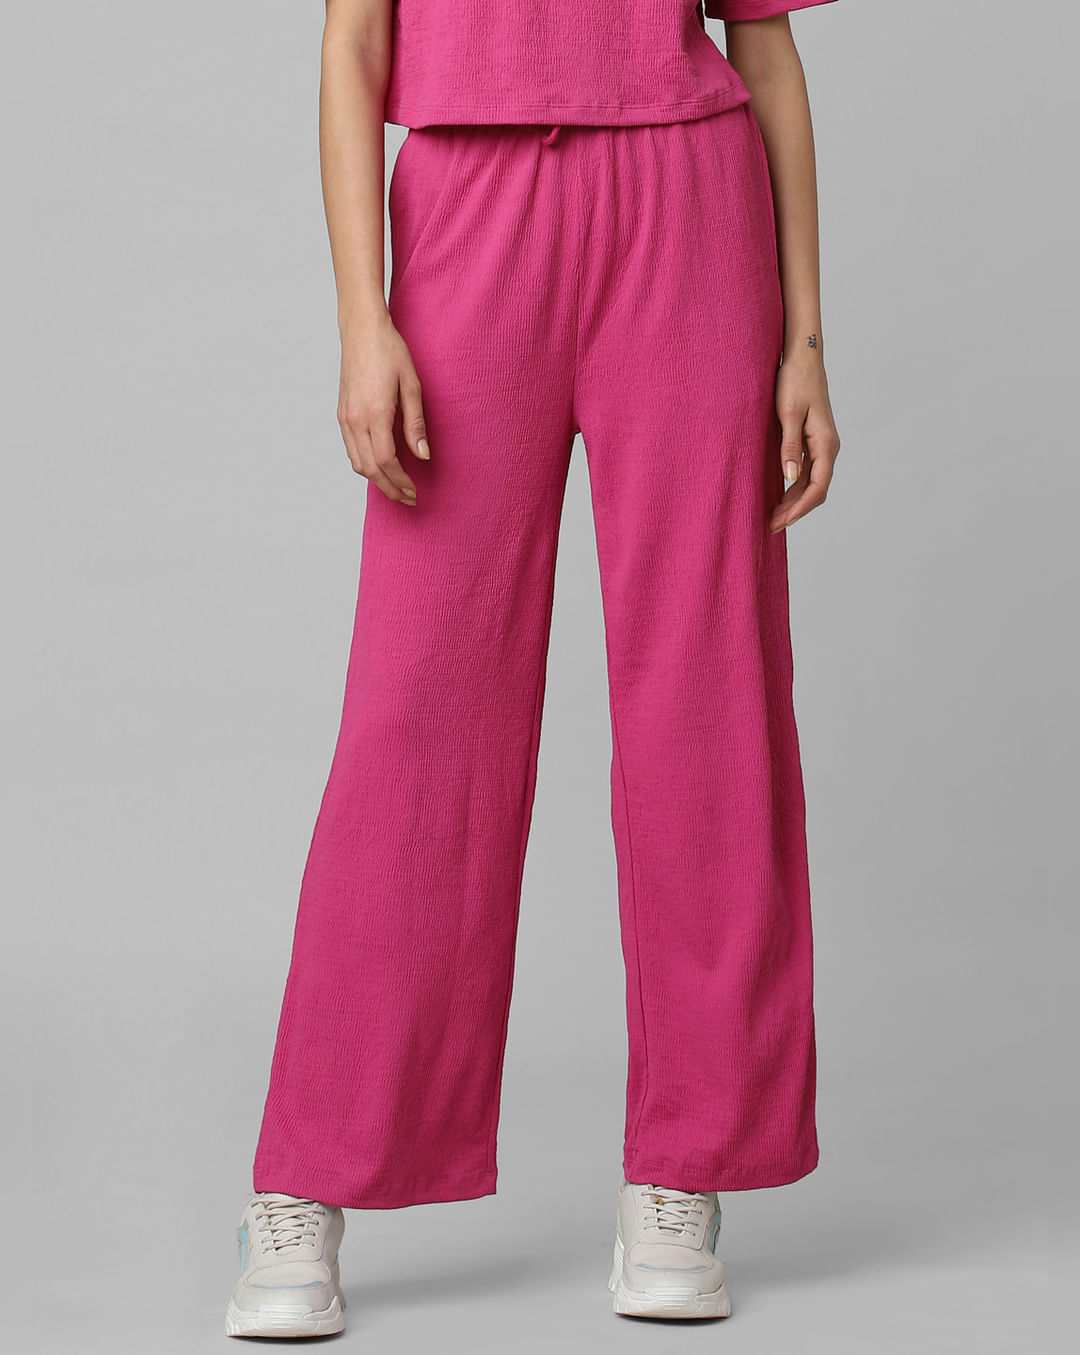 pink pants 16 - Conscious & Chic